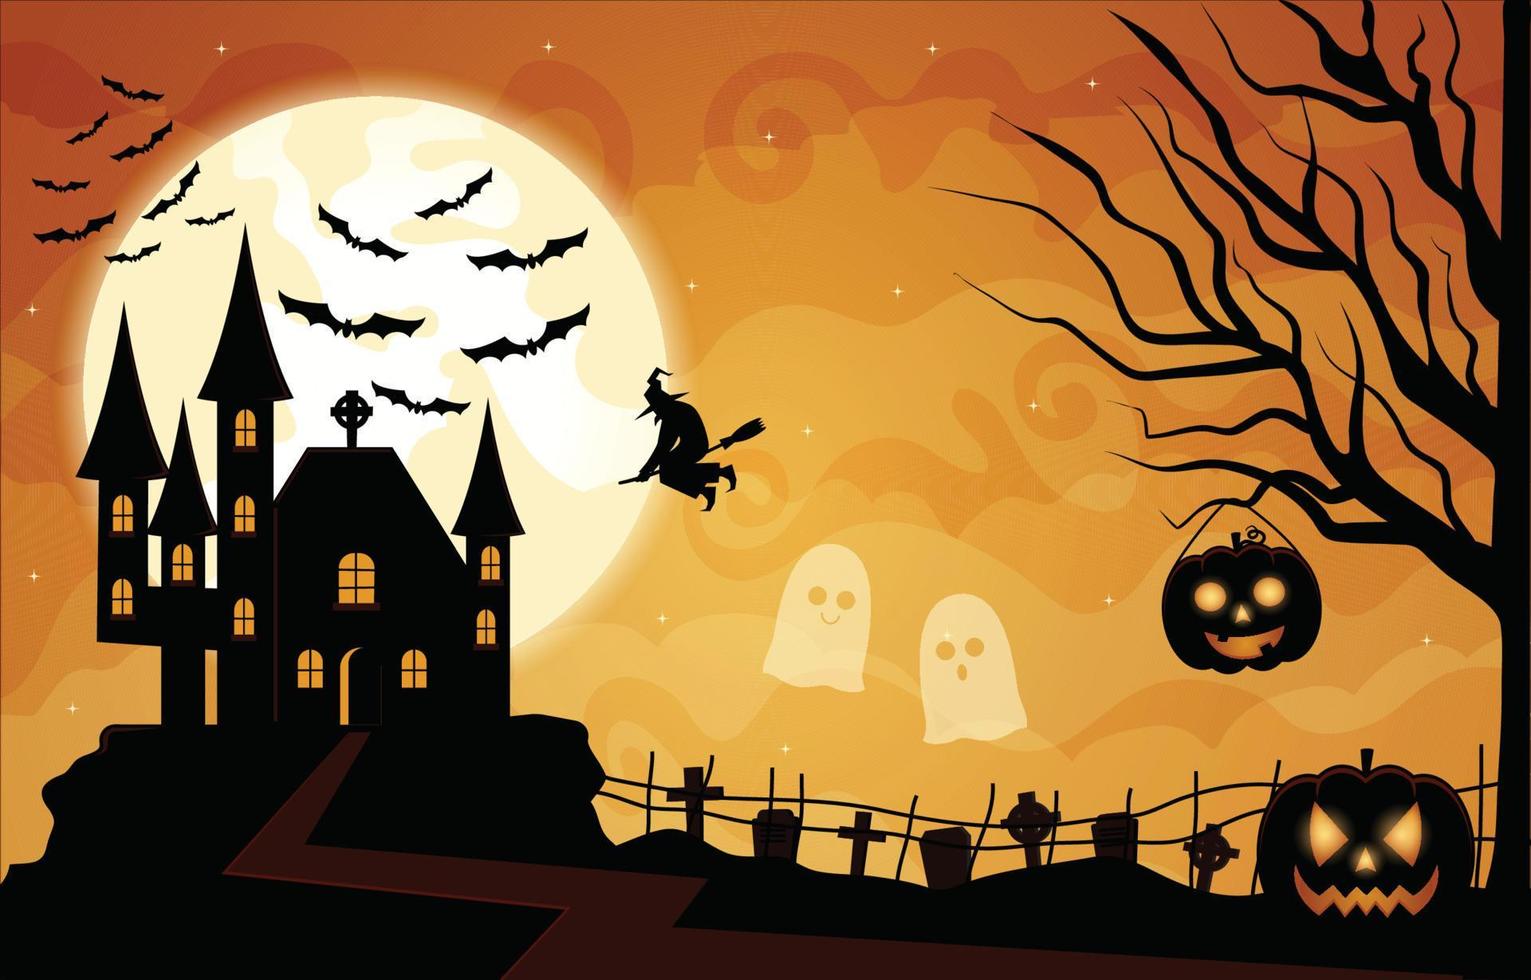 Trick or Treat with Spooky Castle, Bats, and Halloween Pumpkin vector